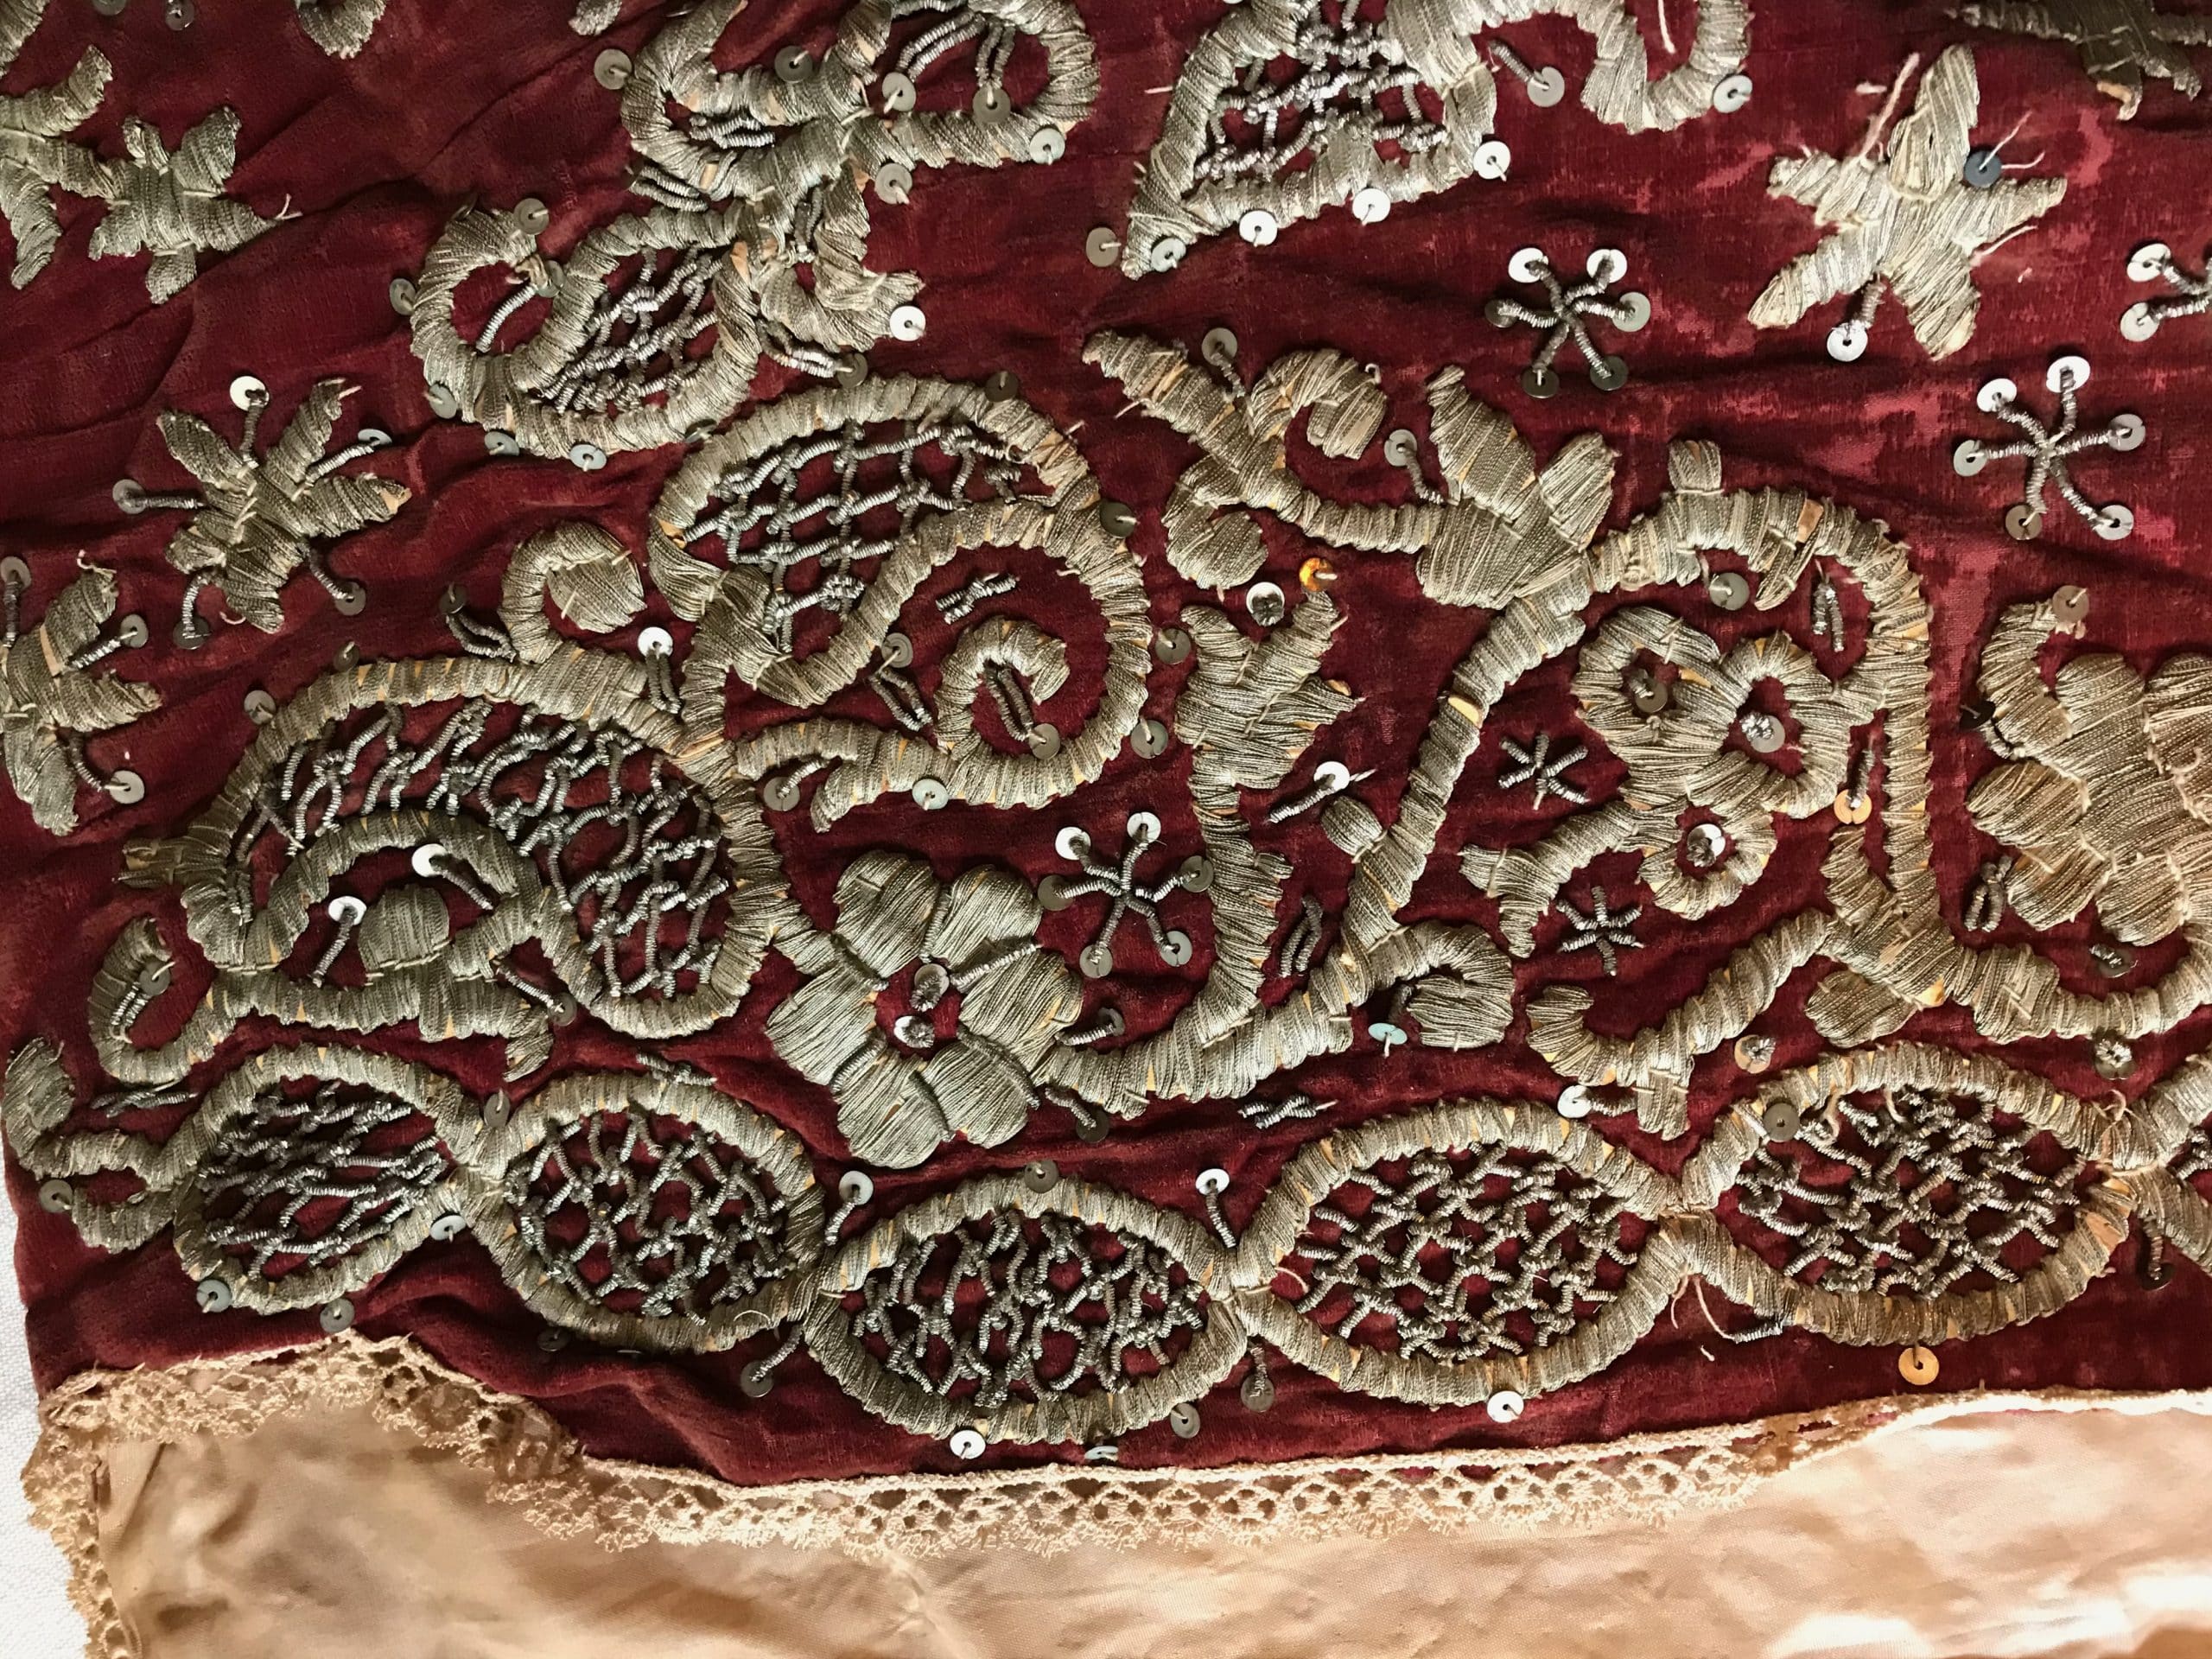 Up close to the gold-threaded brocade